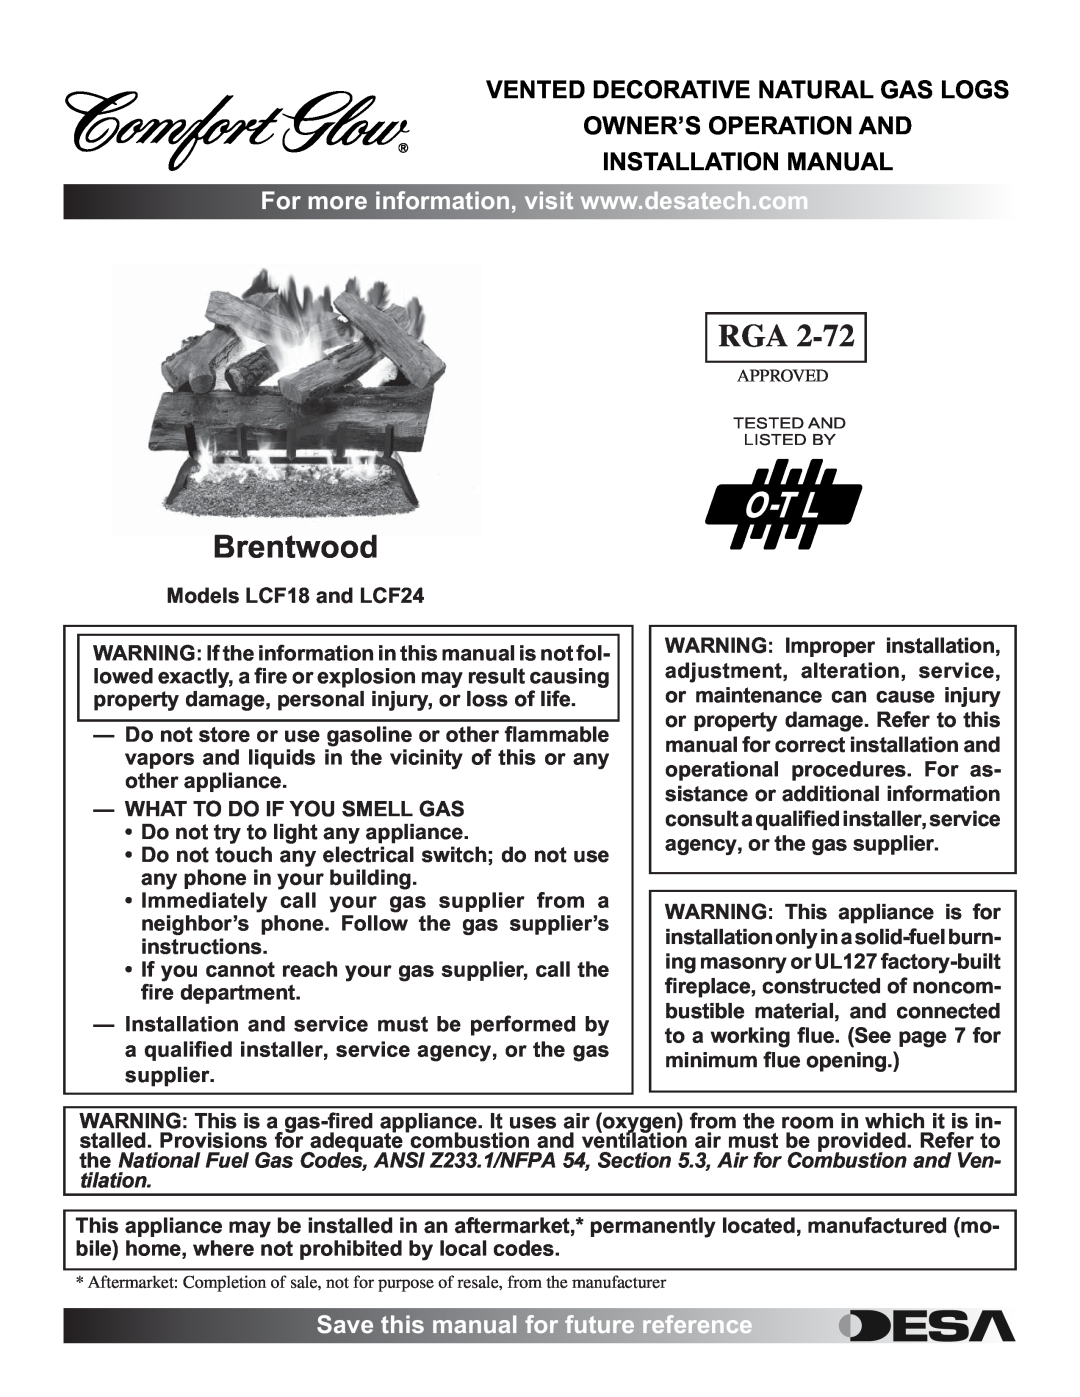 Desa RGA 2-72 installation manual Brentwood, Save this manual for future reference, Vented Decorative Natural Gas Logs 